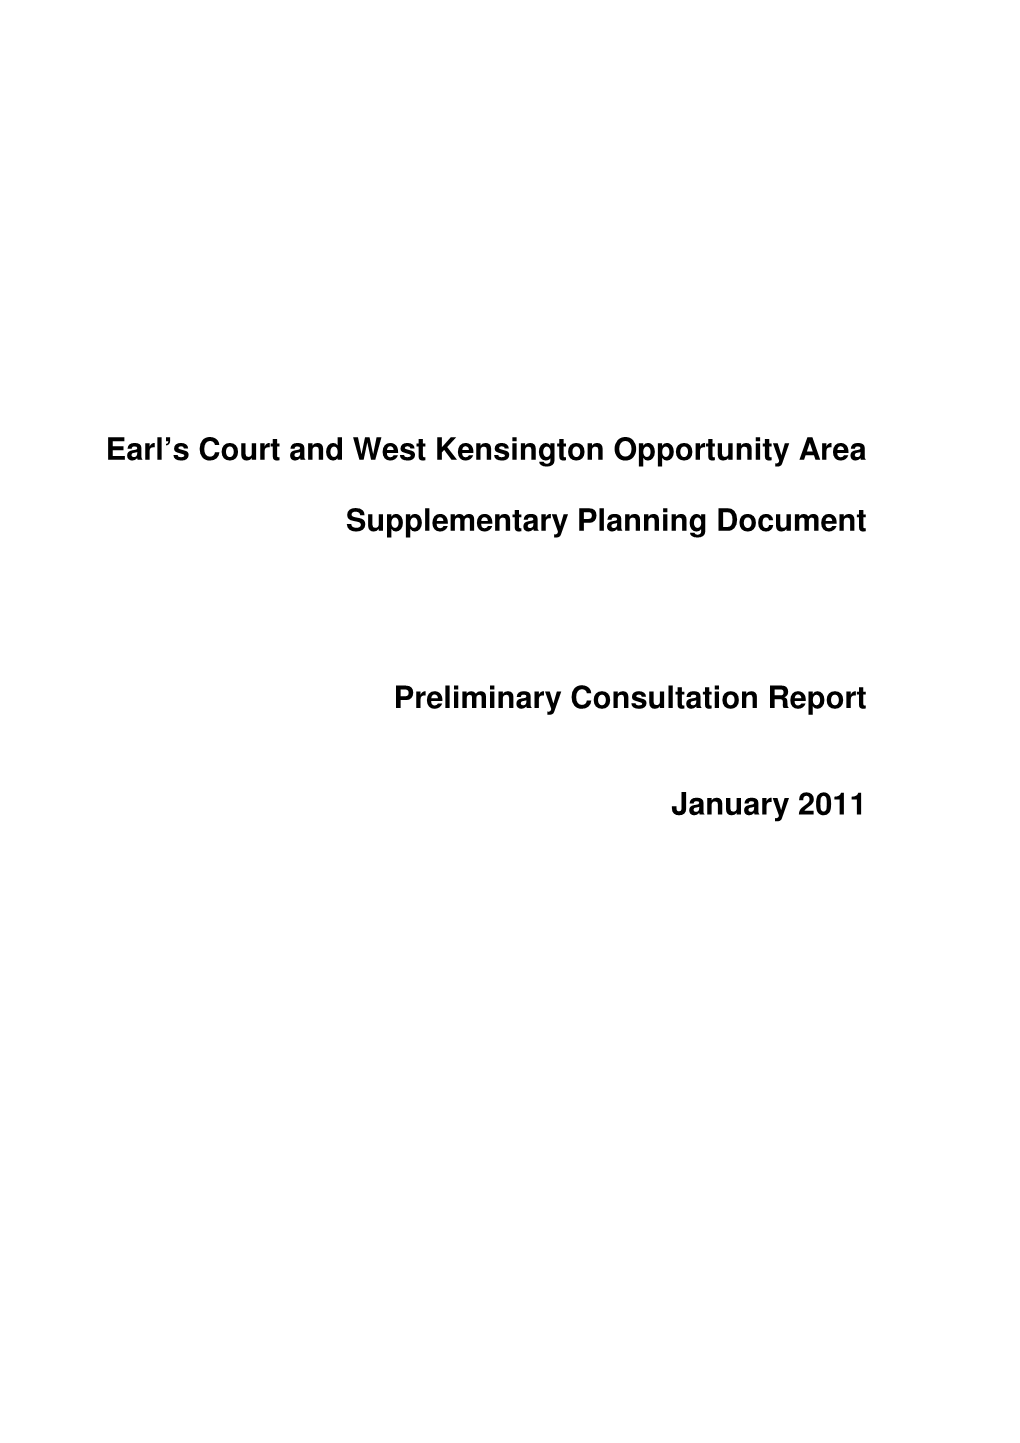 Earl's Court and West Kensington Opportunity Area Supplementary